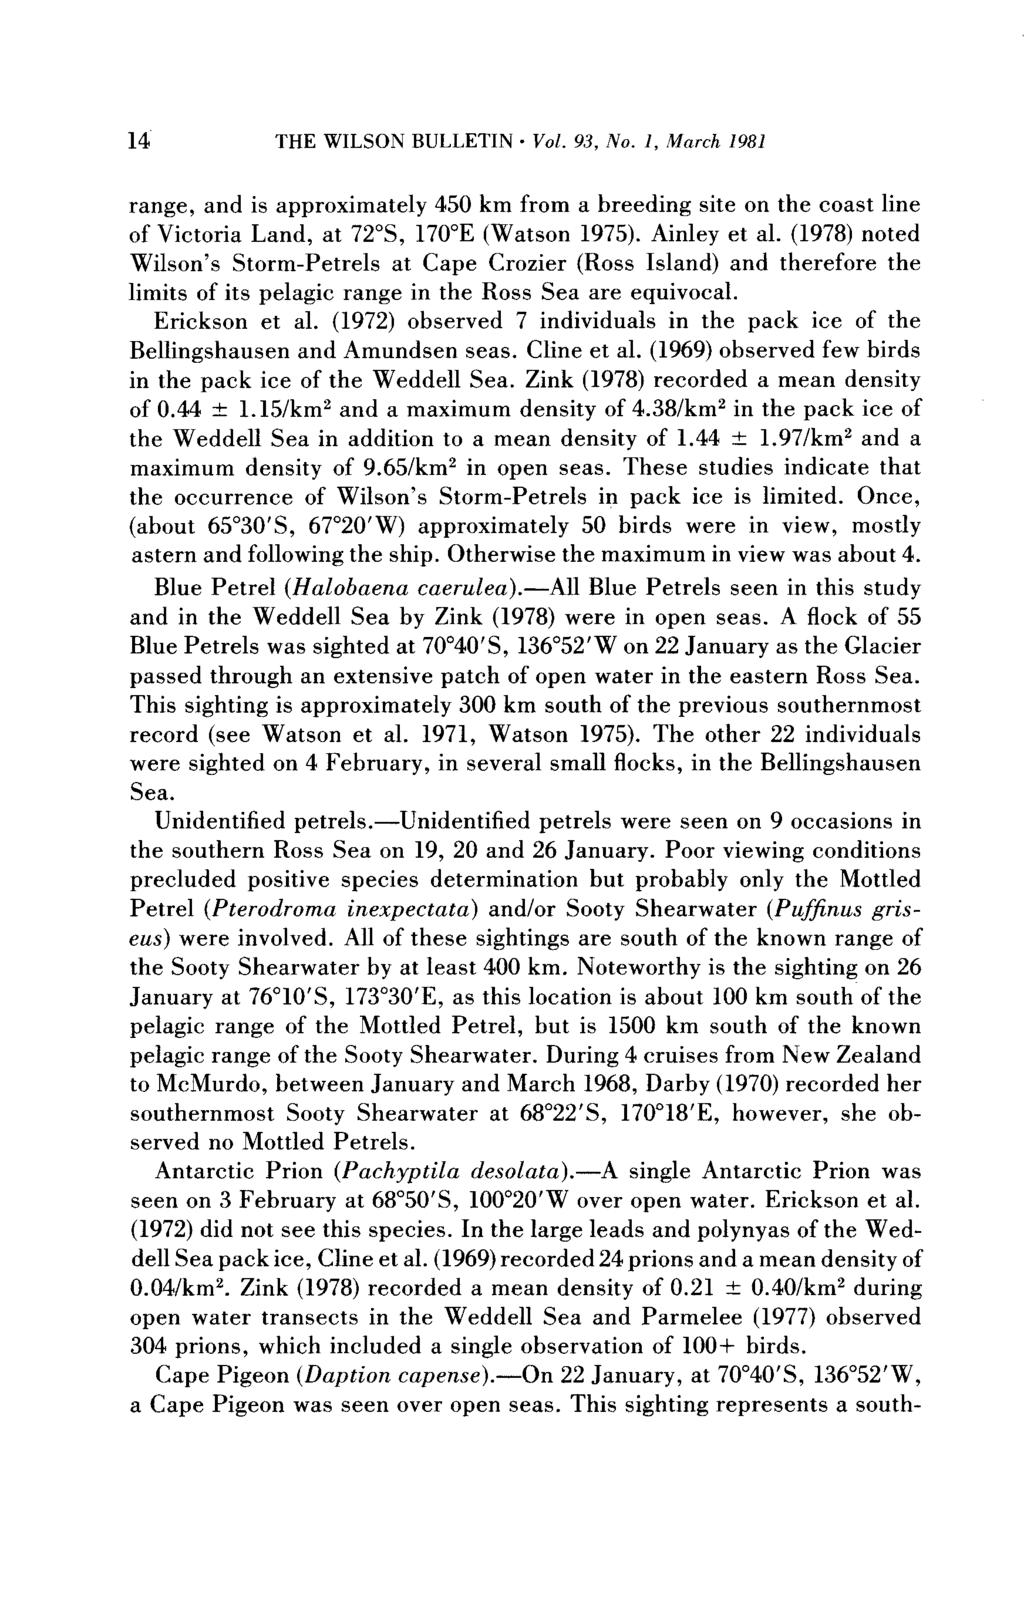 14 THE WILSON BULLETIN - Vol. 93, No. 1, March 1981 range, and is approximately 450 km from a breeding site on the coast line of Victoria Land, at 72 S, 170 E (Watson 1975). Ainley et al.